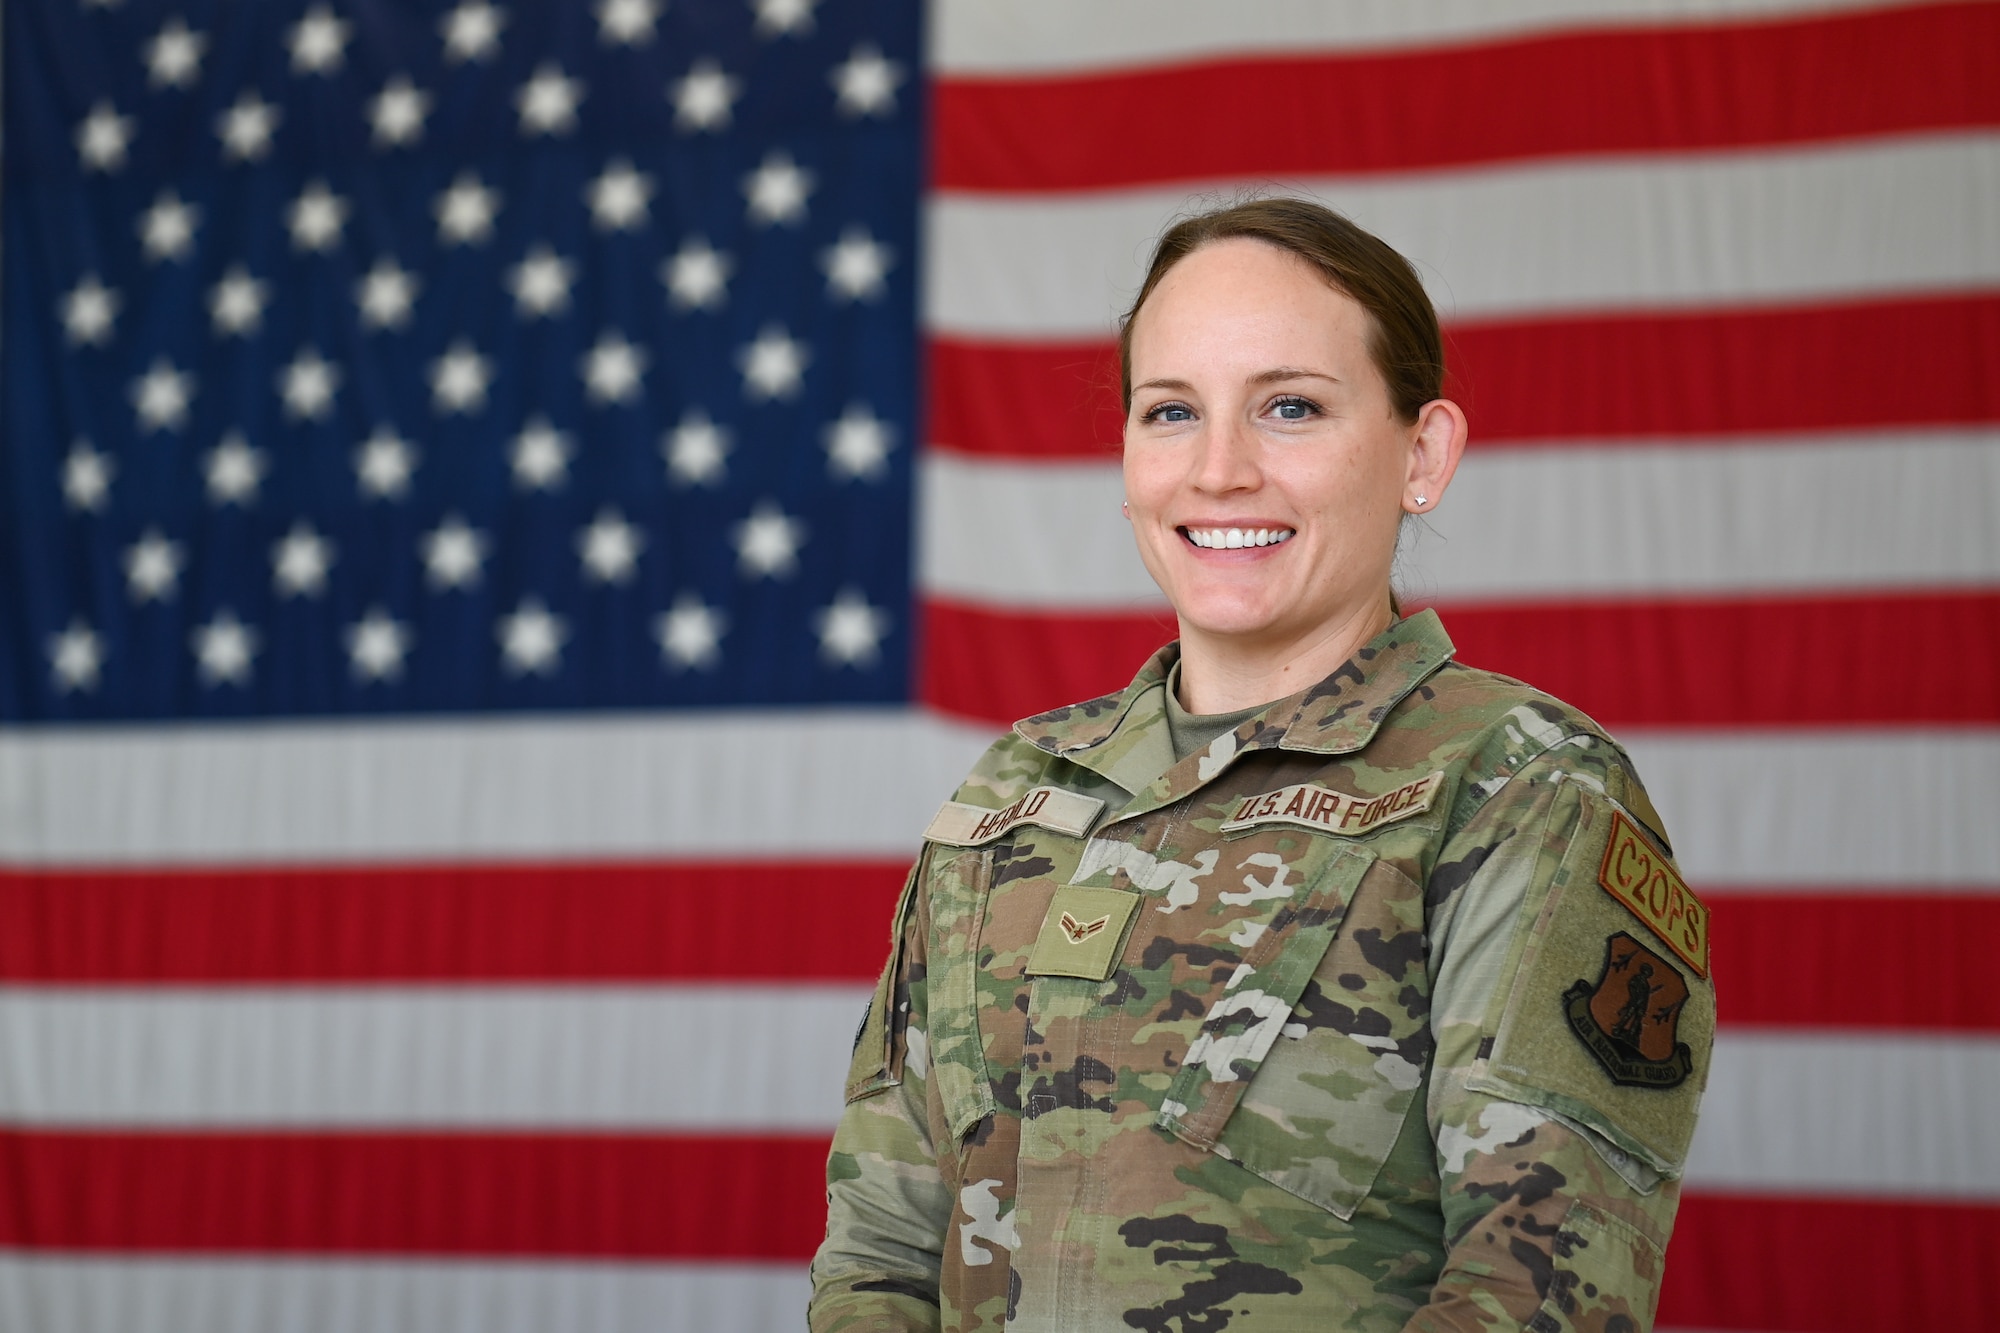 Female Airman in uniform stands for photo with large American flag in background.